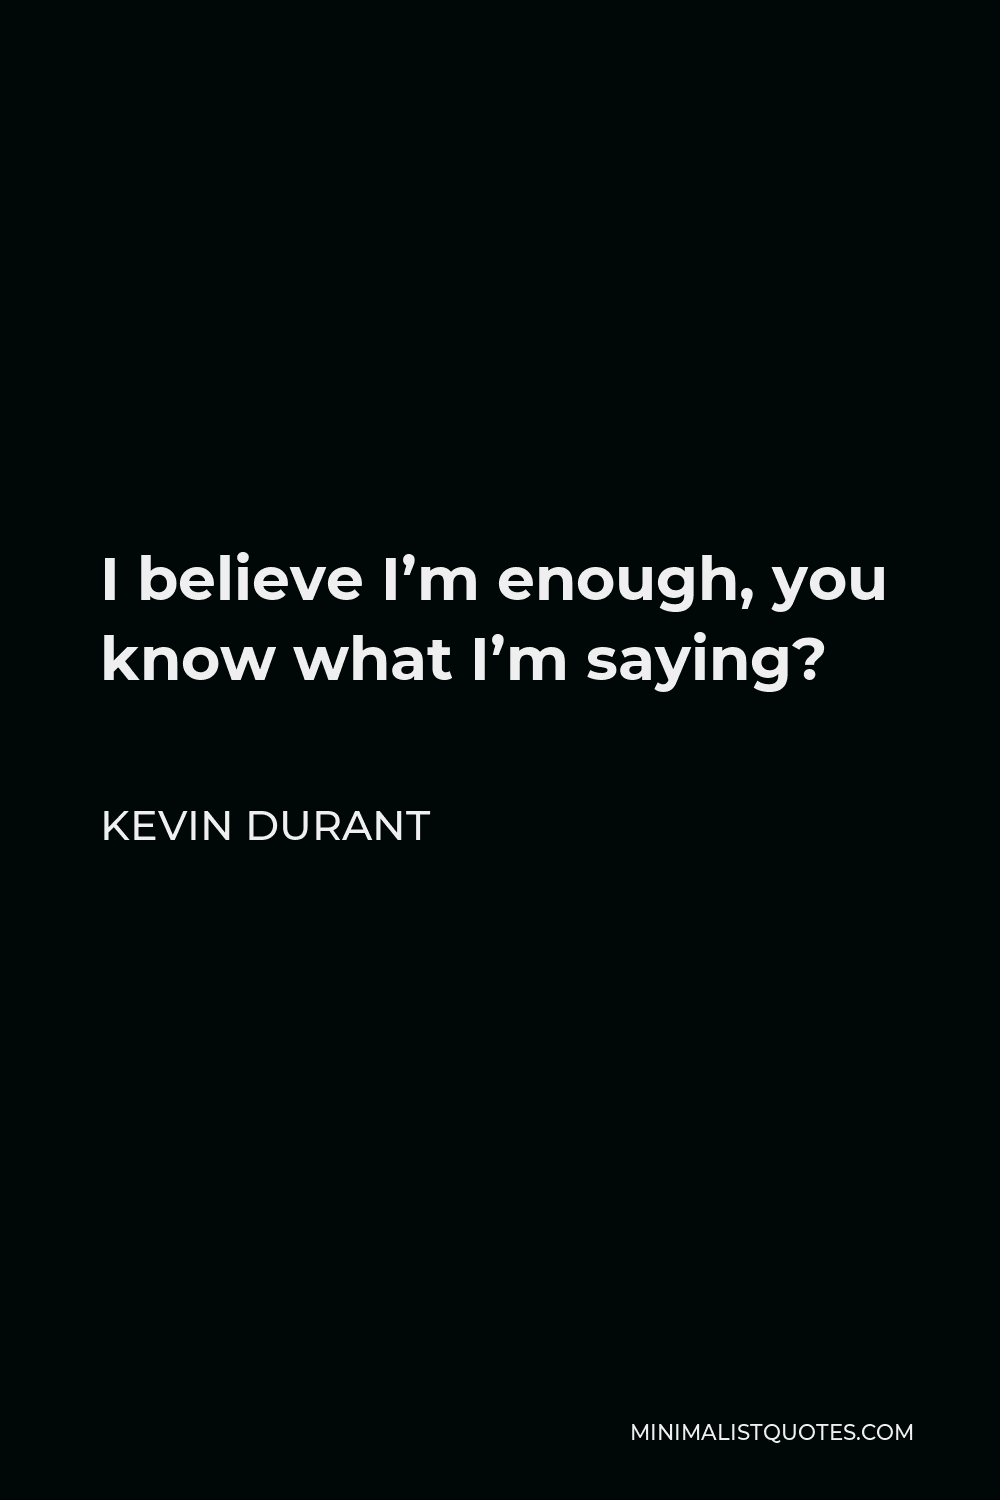 Kevin Durant Quote - I believe I’m enough, you know what I’m saying?